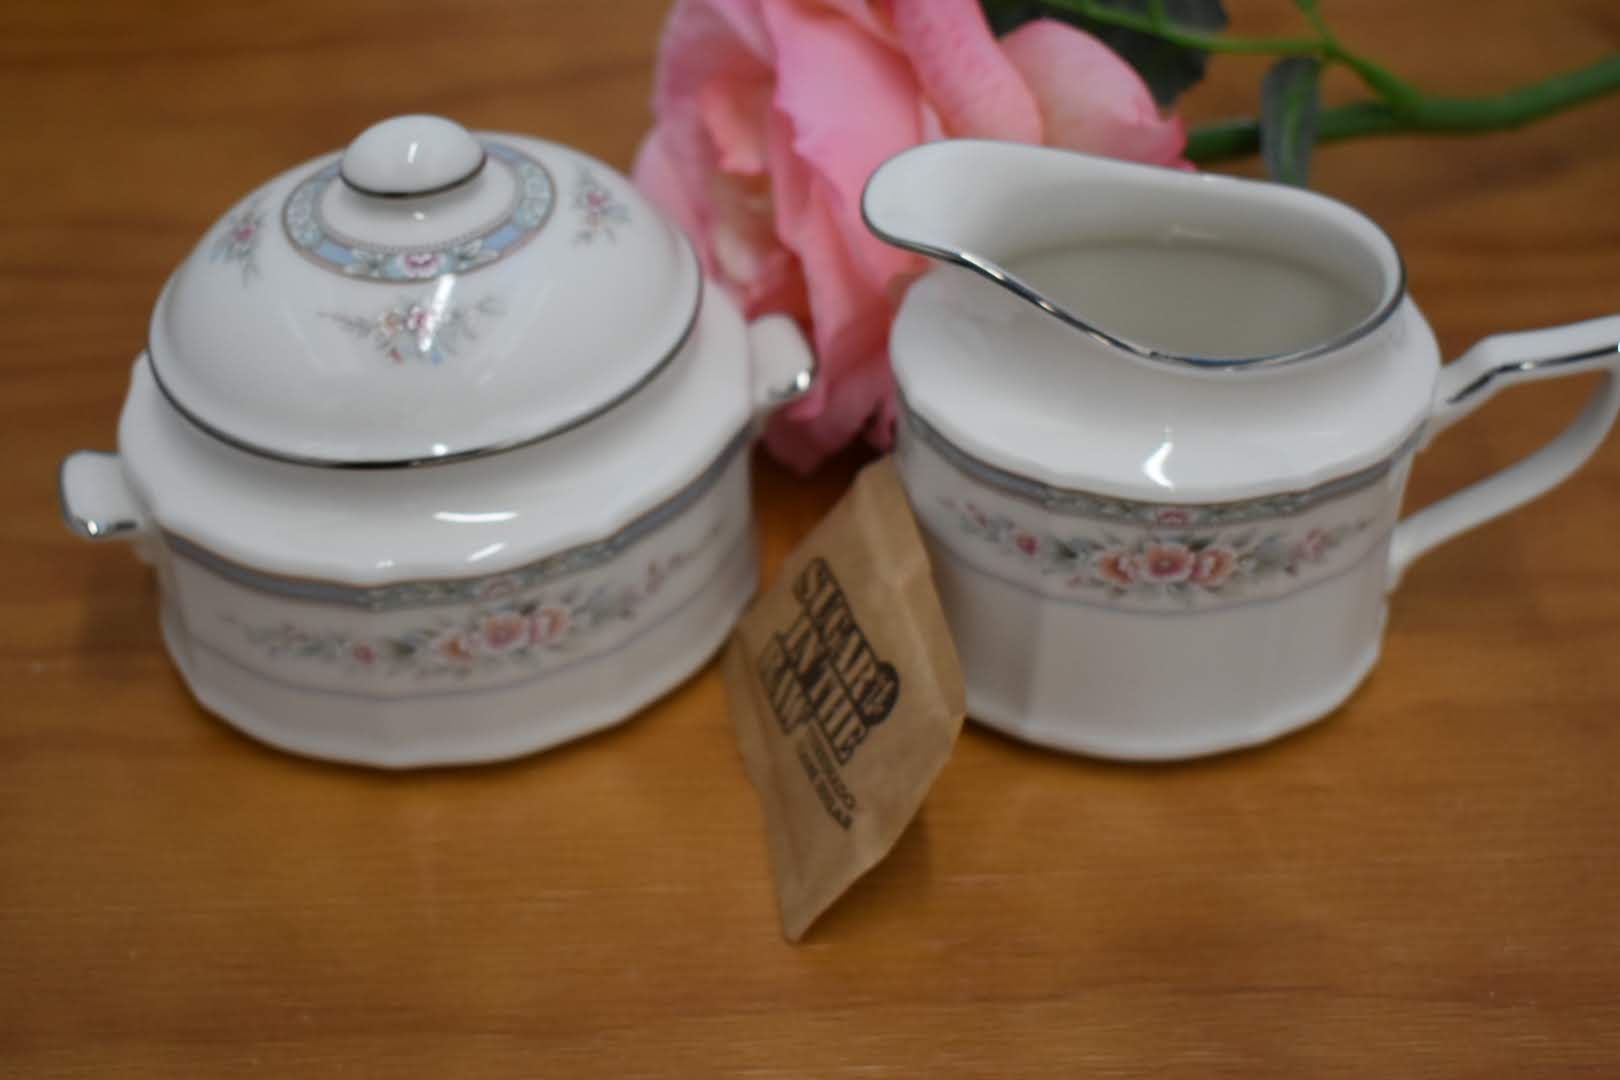 Noritake Rothschild Pattern - Porcelain Fine China - Sugar Bowl With Lid and Creamer